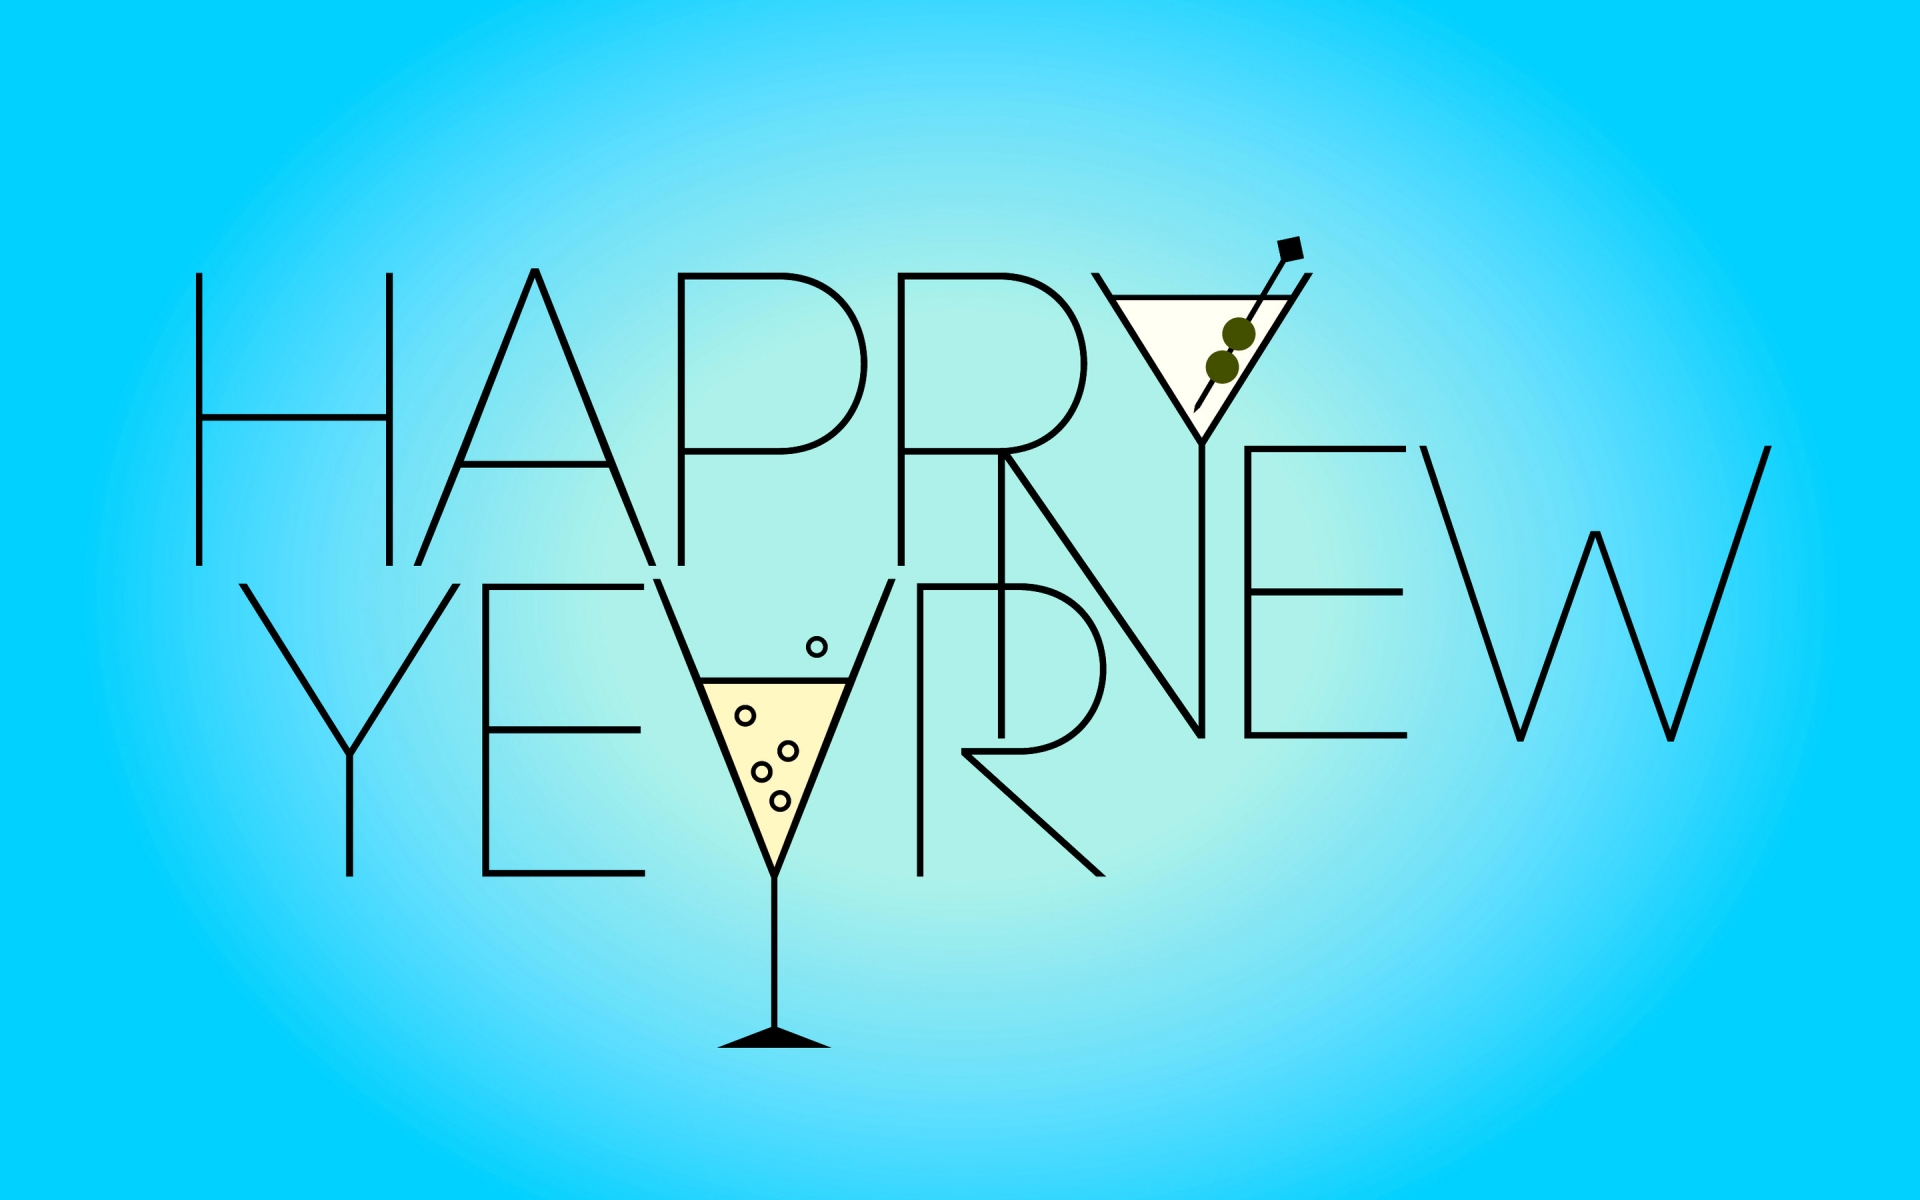 Happy New Year 2013 for 1920 x 1200 widescreen resolution